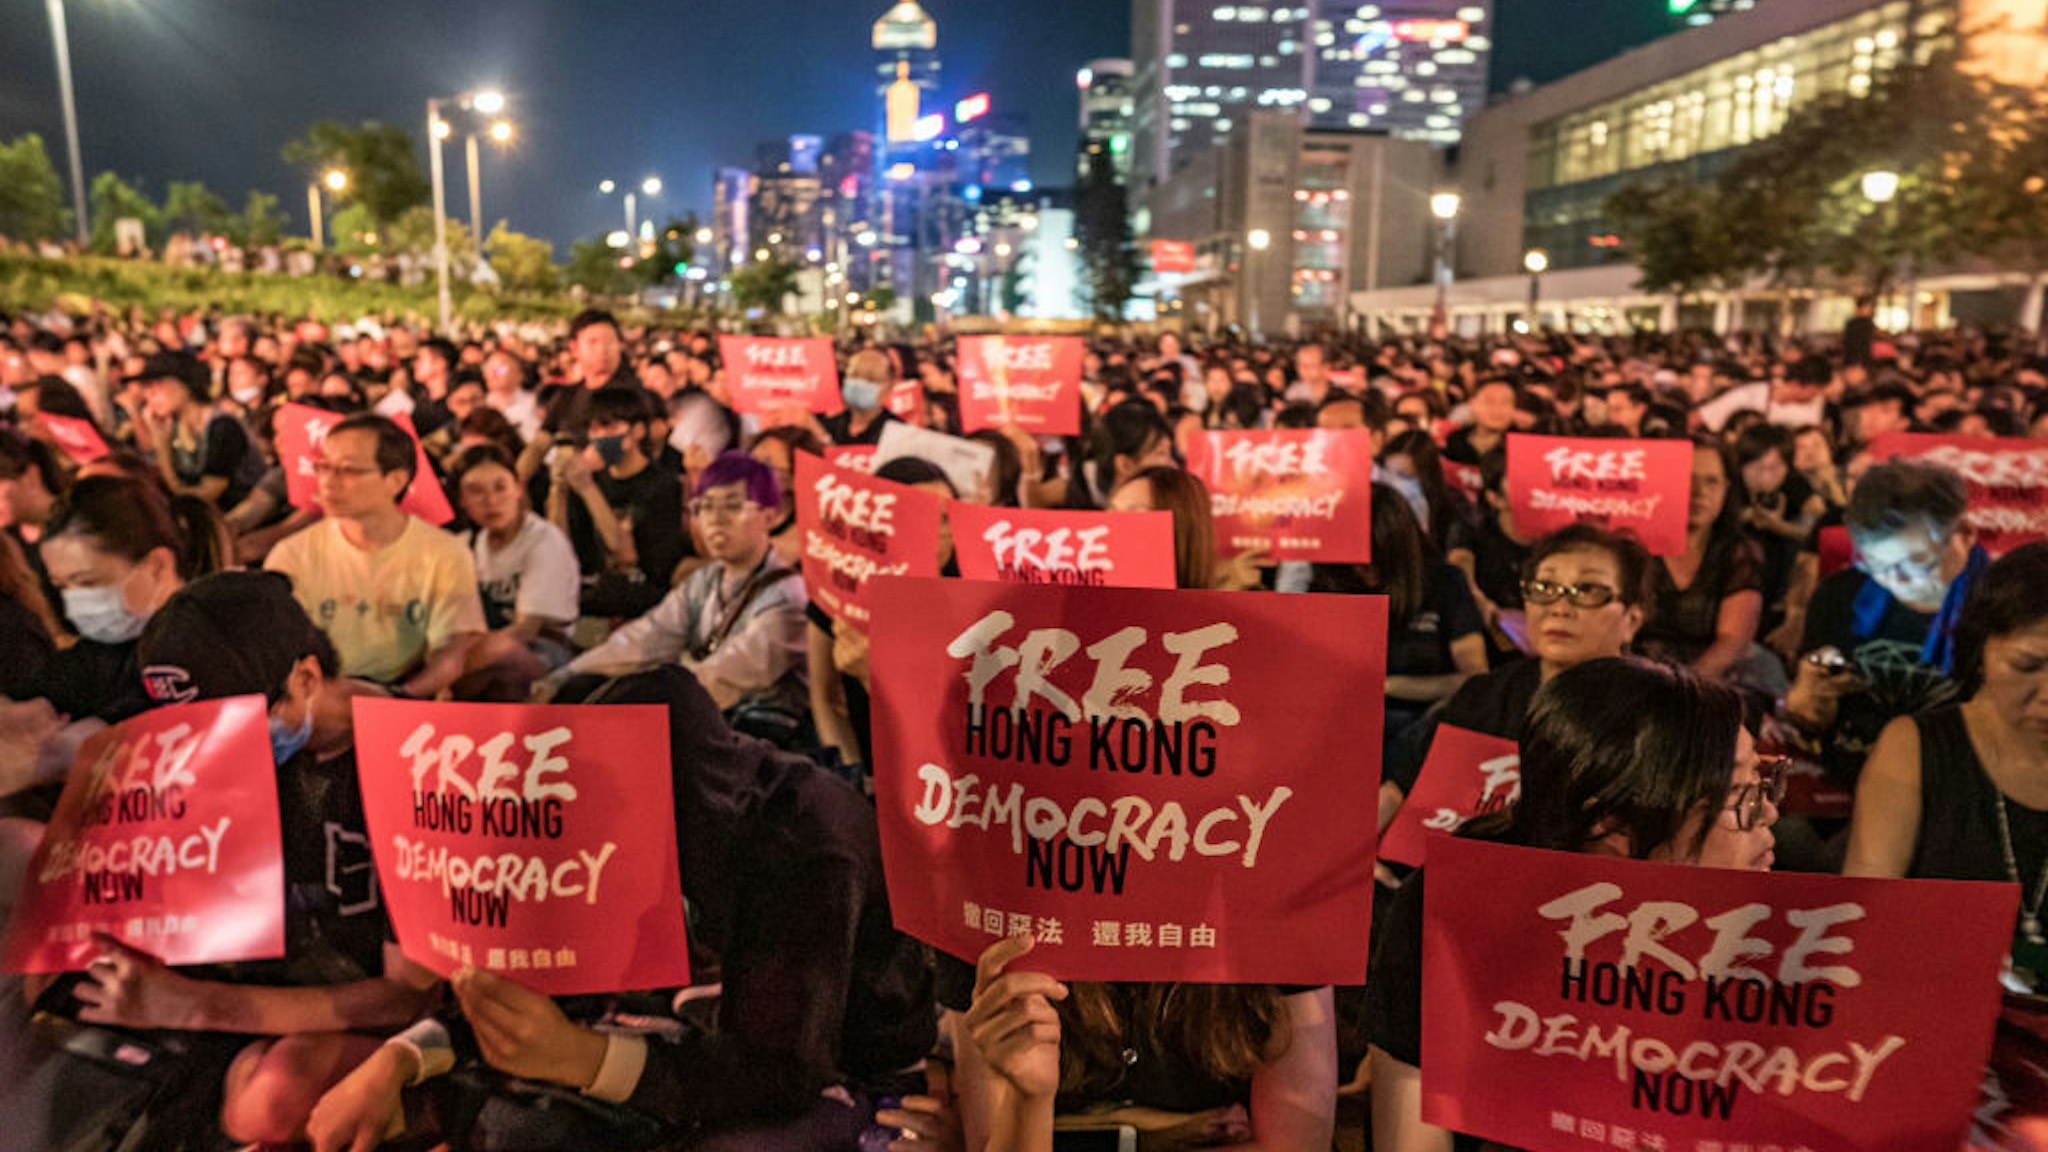 HONG KONG, HONG KONG - JUNE 26: Protesters hold placards as they take part in a rally against the extradition bill ahead of 2019 G20 Osaka summit at Edinburgh Place in Central district on June 26, 2019 in Hong Kong, China. Leaders from the Group of 20 nations are scheduled to gather this week for the G20 summit in Osaka, Japan.